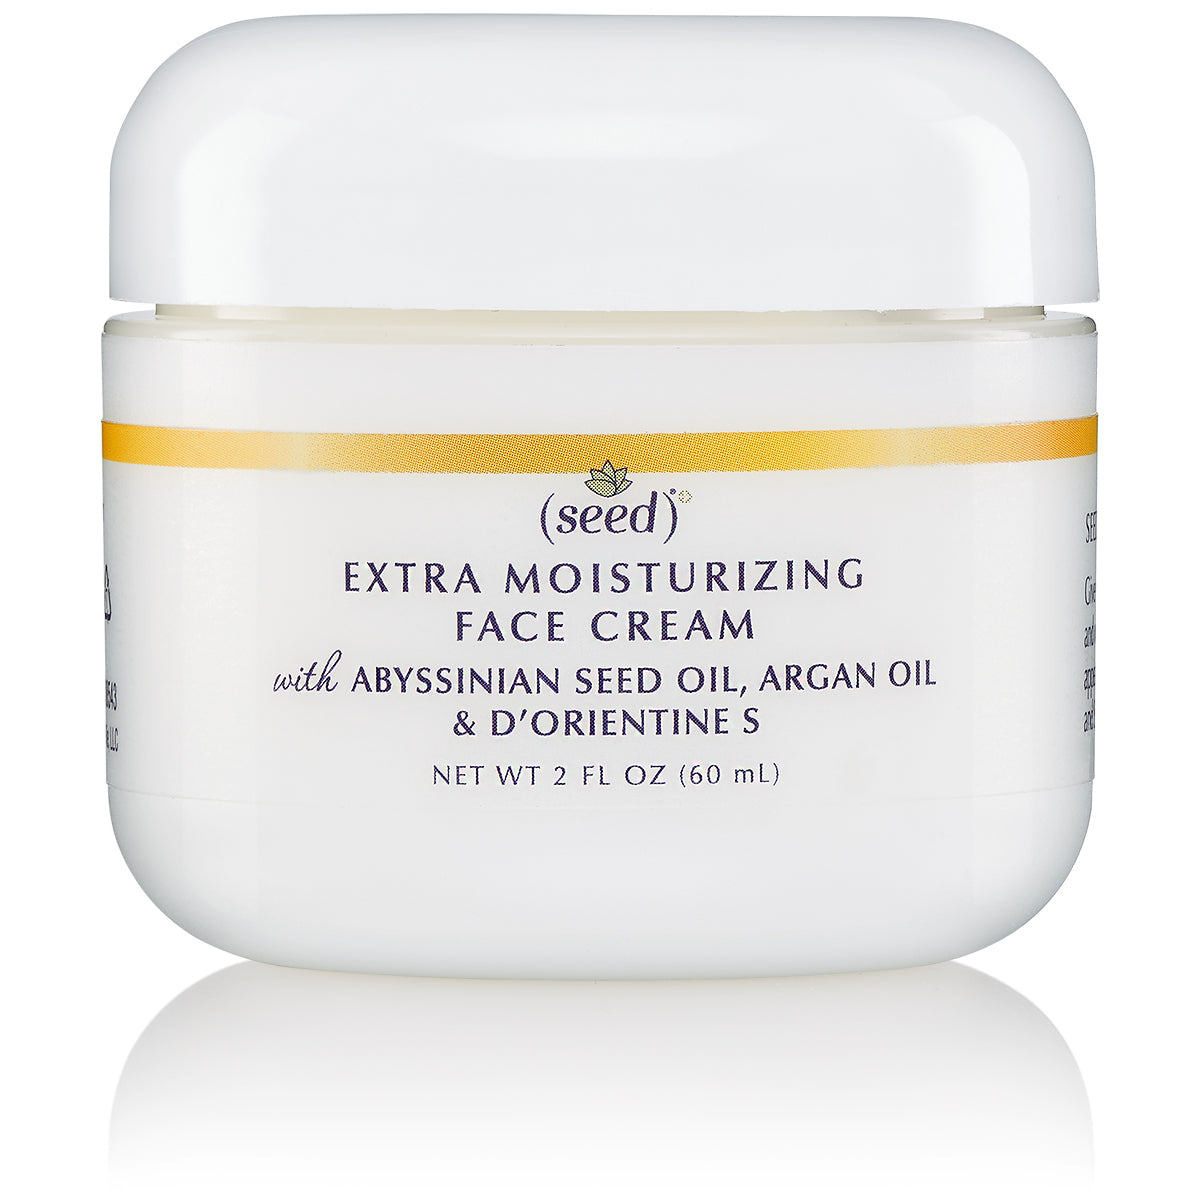 Seed Advanced Botanicals Extra Moisturizing Face Cream with Abyssinian, Argan Oils and D'Orientine S